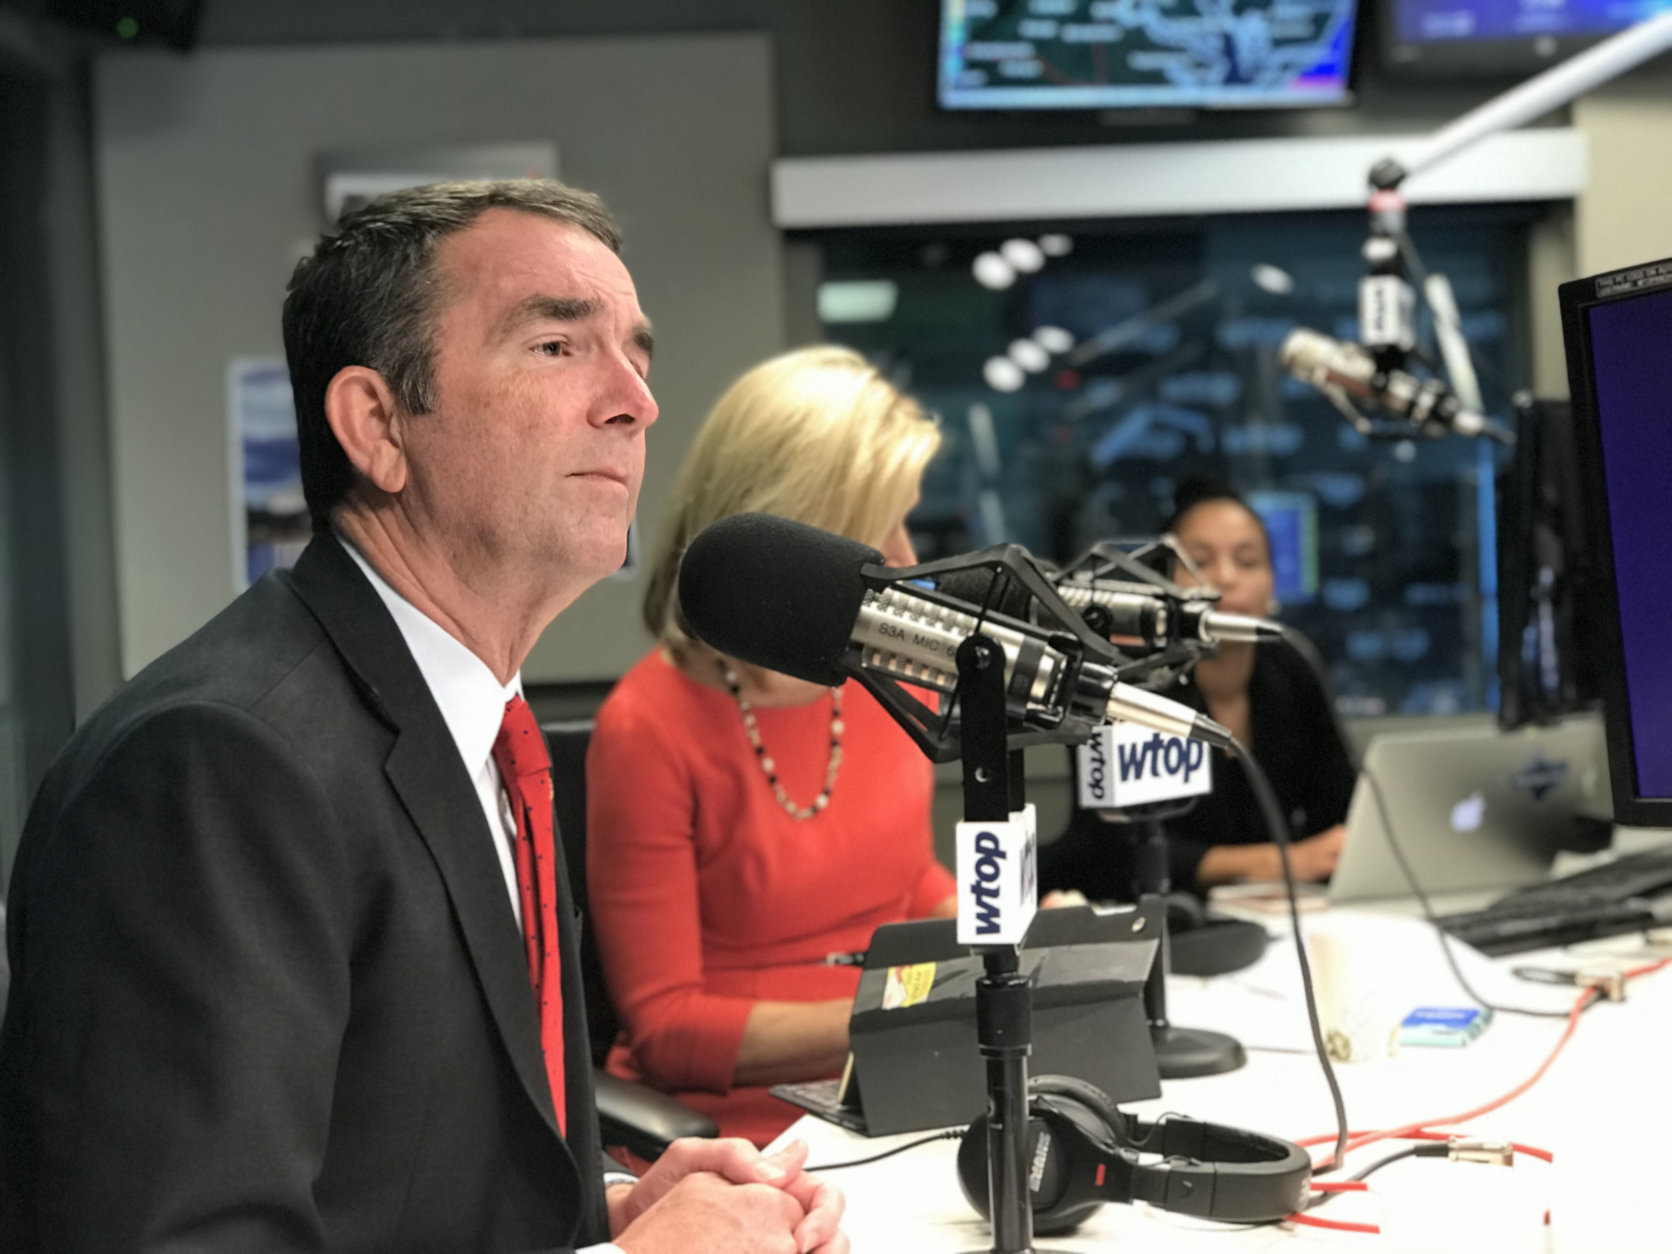 Virginia Gov. Ralph Northam on WTOP Wednesday, Oct. 31, 2018. (WTOP/Ginger Whitaker)